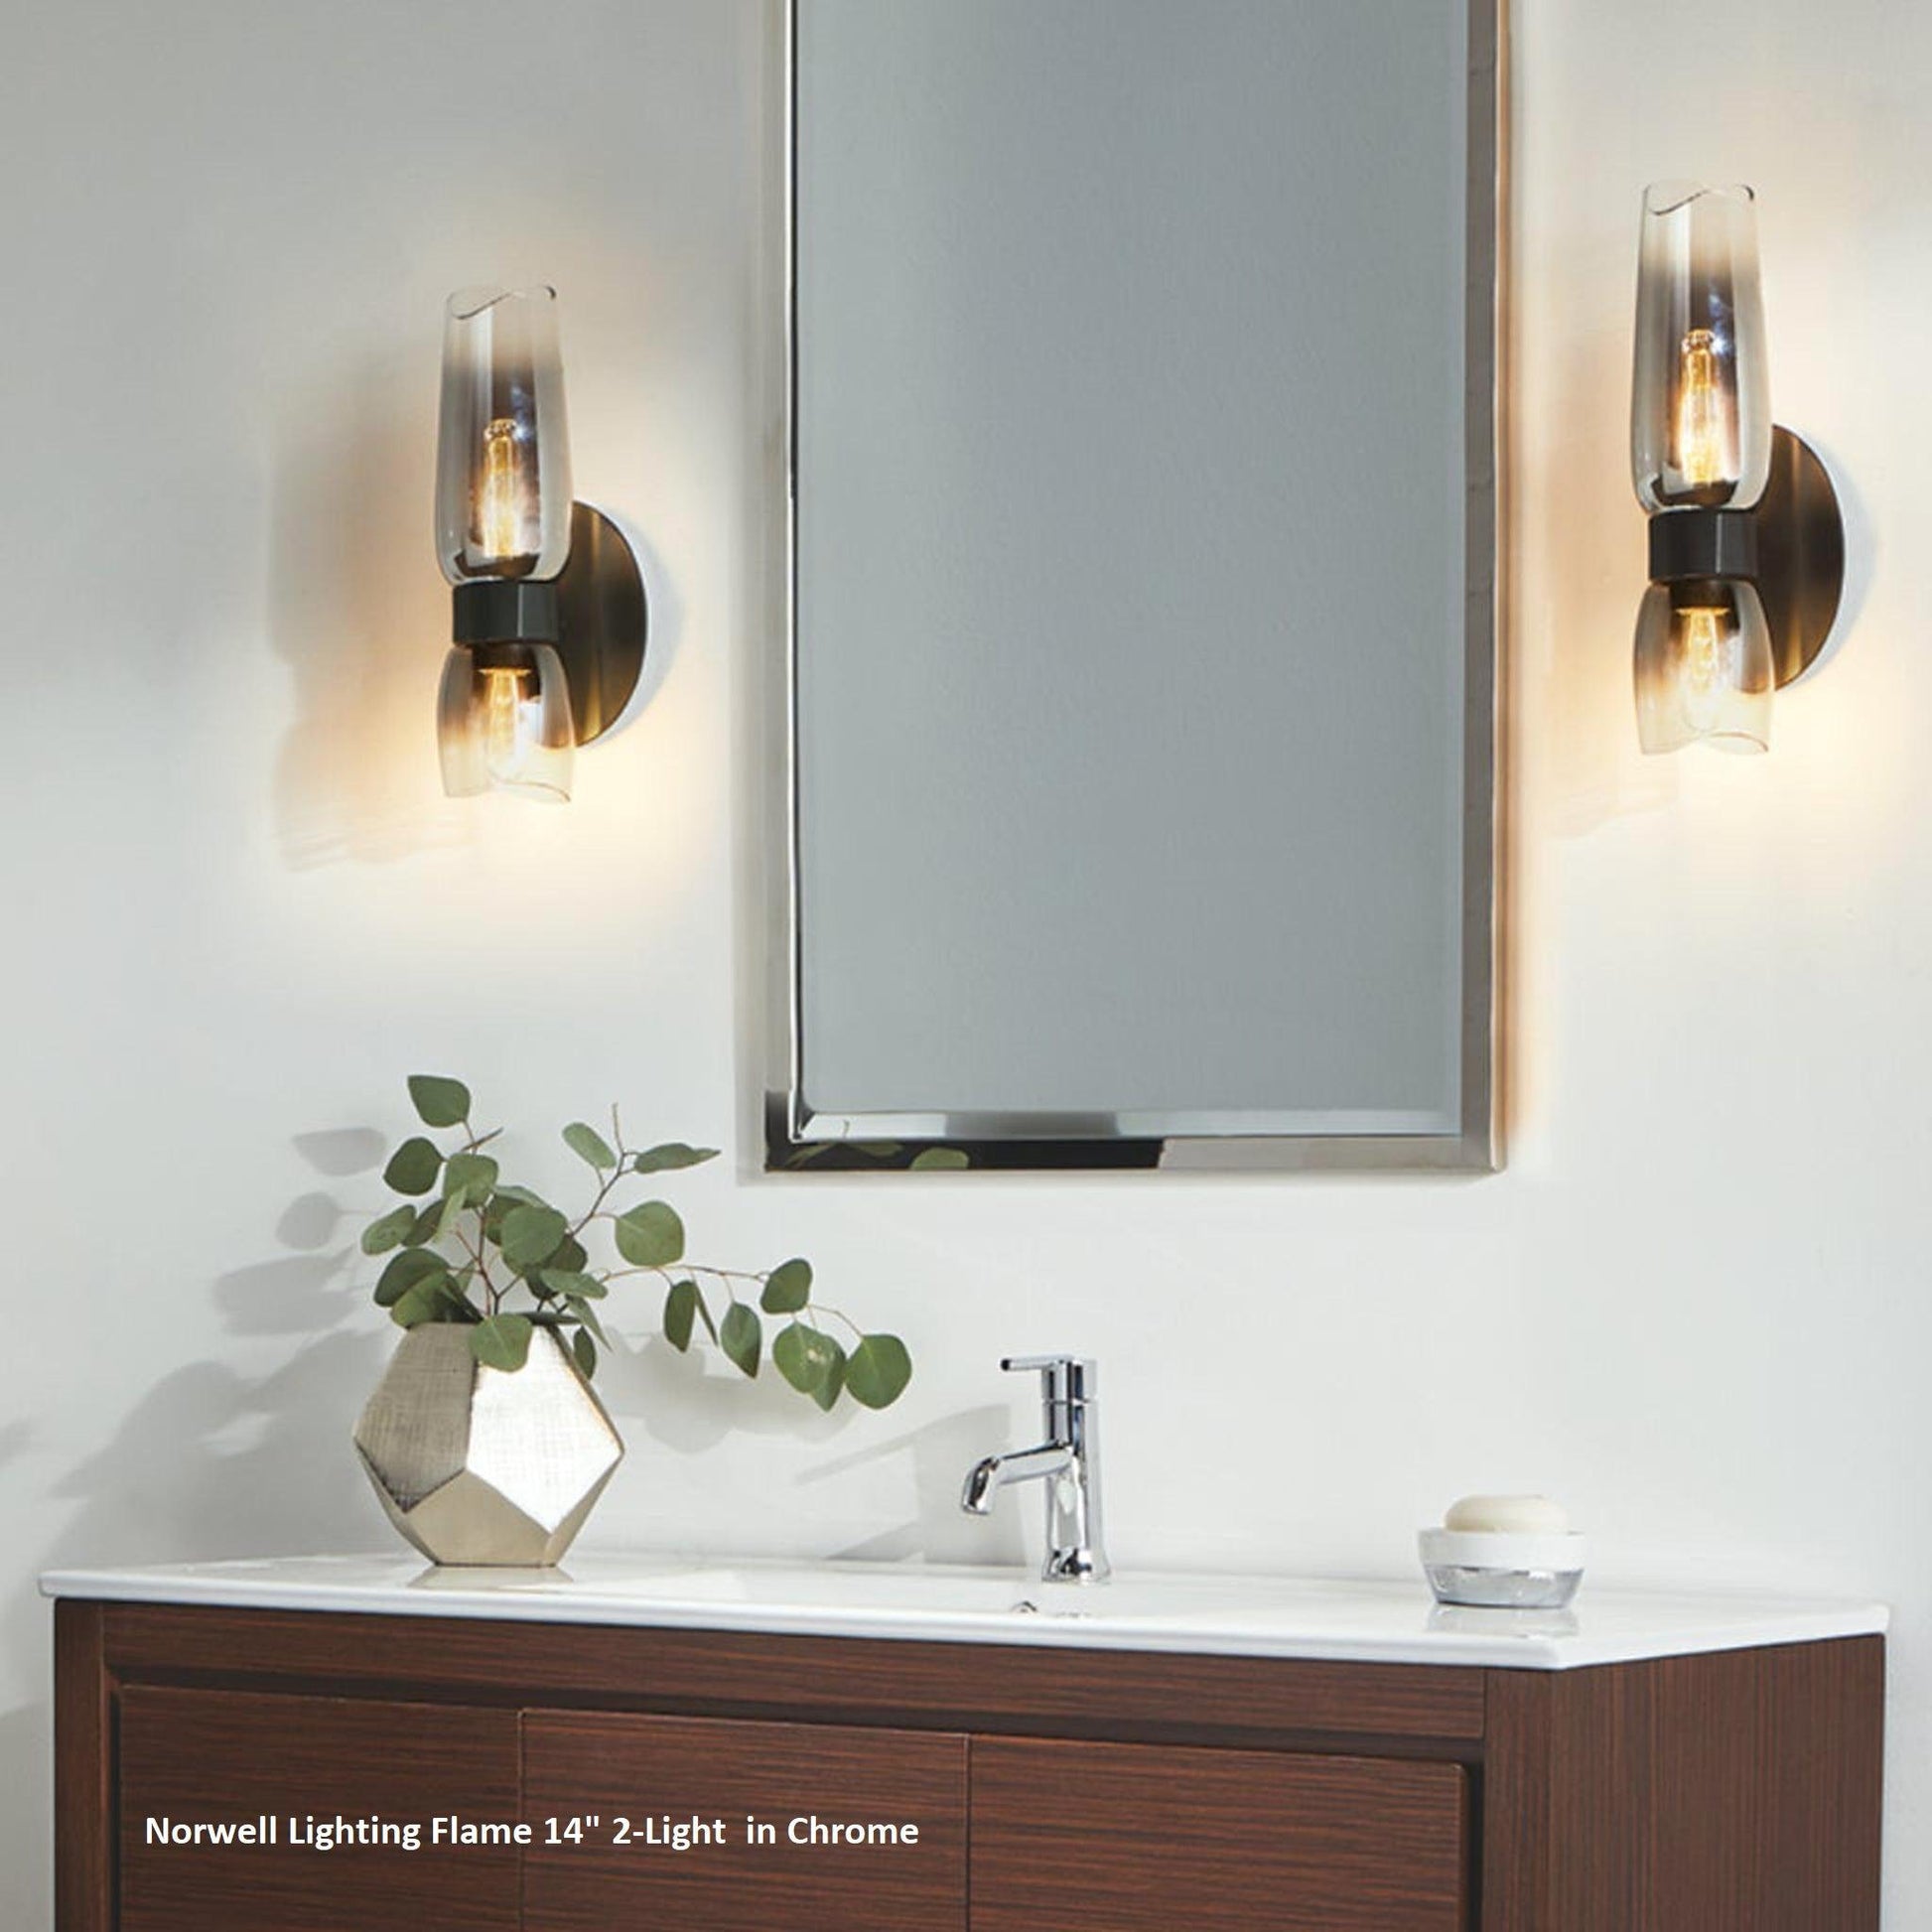 Norwell Lighting Flame 14" 2-Light Chrome Vanity Wall Sconce With Clear/Chrome Gradient Diffuser